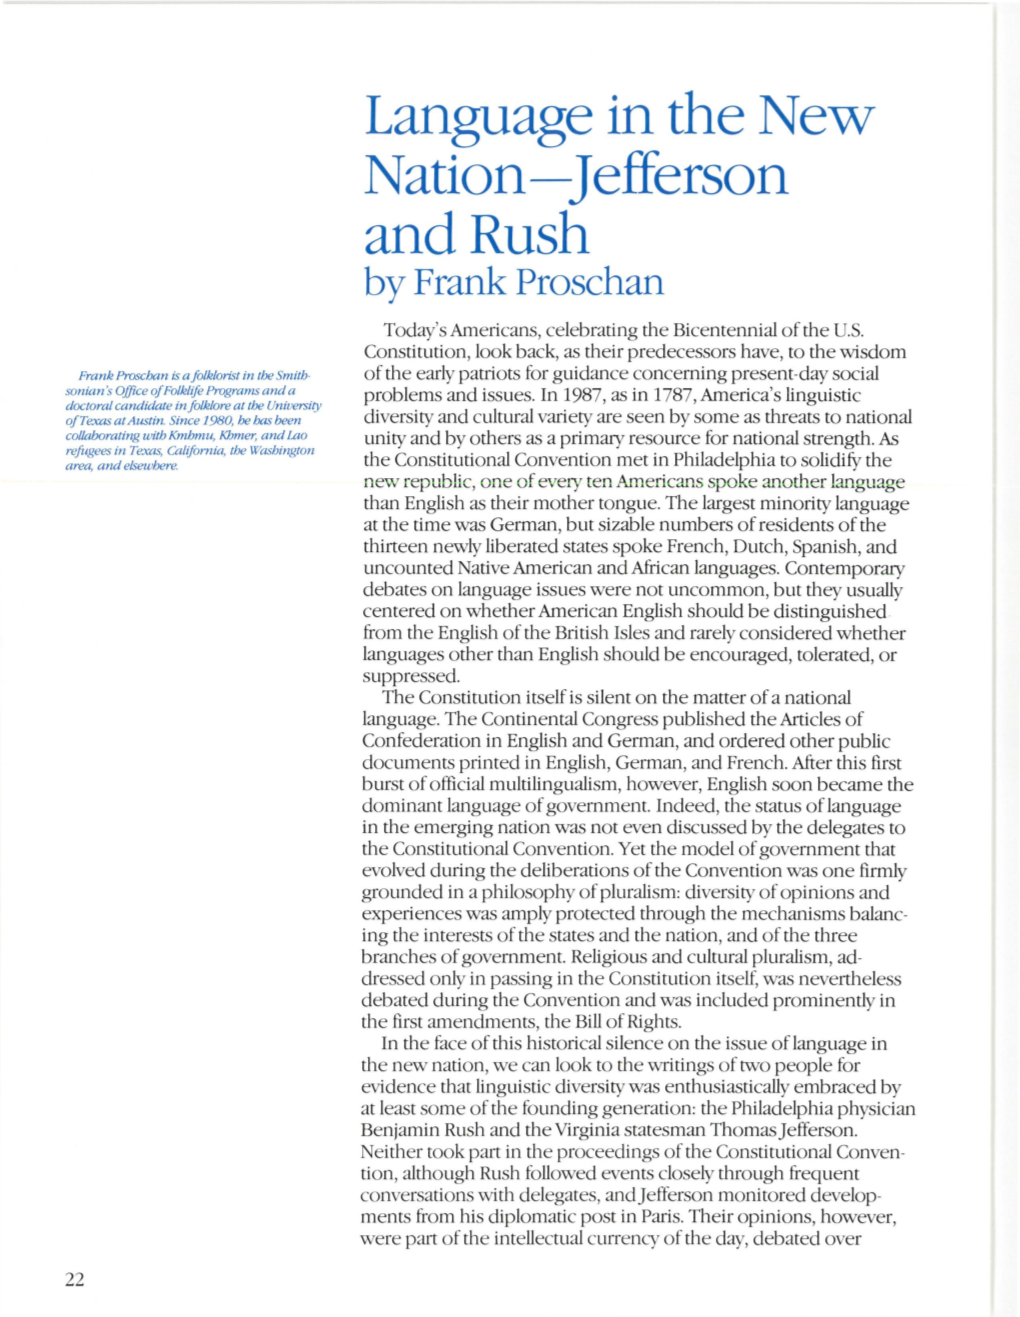 Language in the New Nation-Jefferson and Rush by Frank Proschan Today's Americans, Celebrating the Bicentennial of the U.S